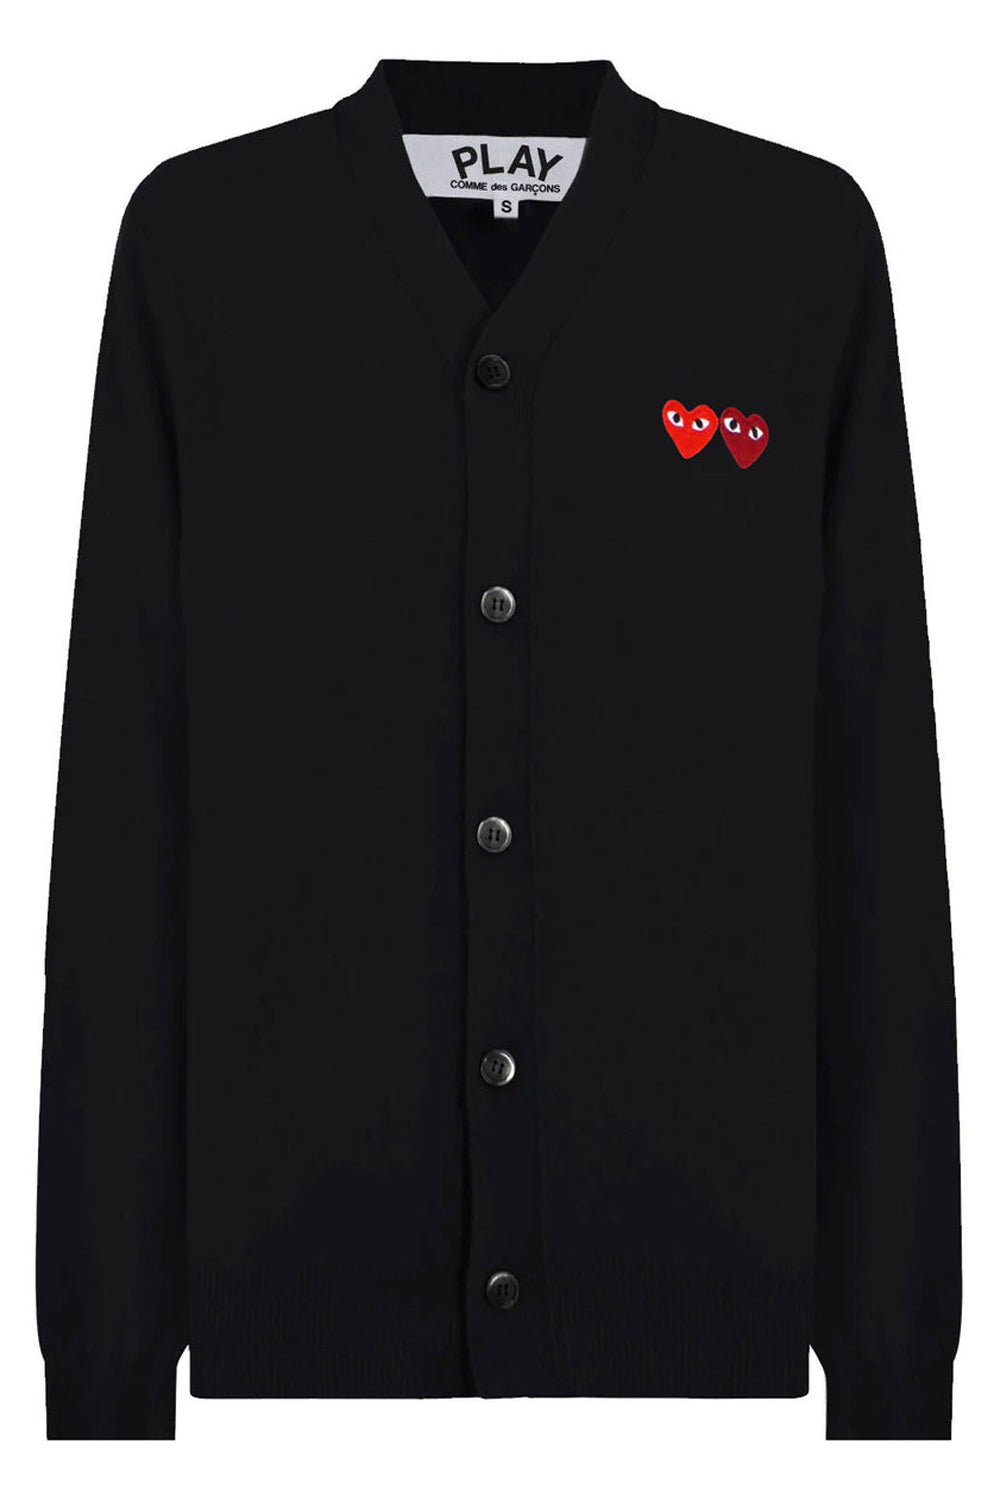 COMME DES GARCONS PLAY RTW PLAY MENS V-NECK DOUBLE HEART CARDIGAN | BLACK/RED HEARTS